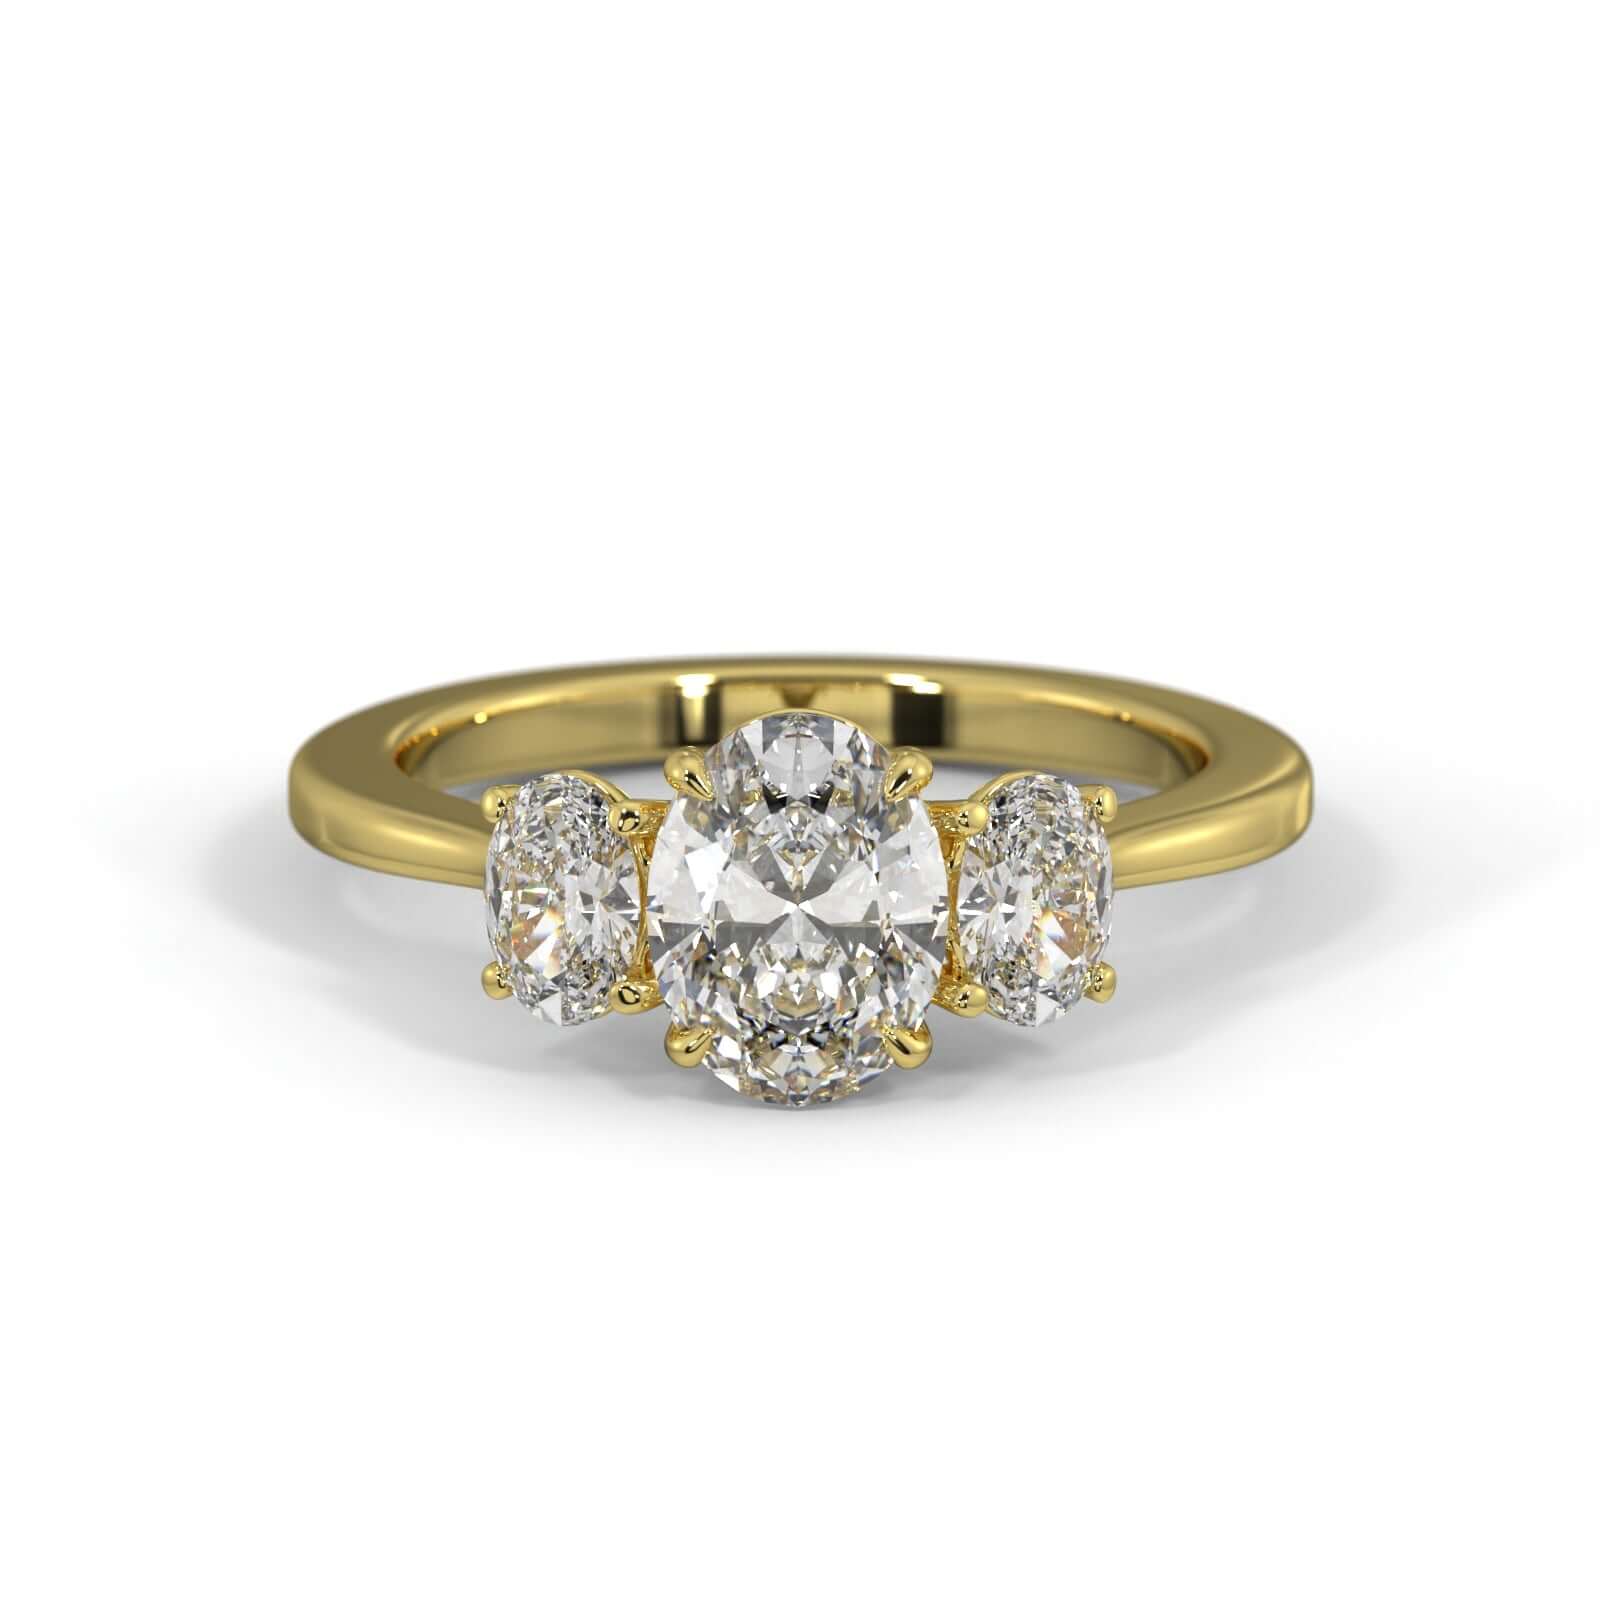 Oval Diamond Engagement Ring Gold